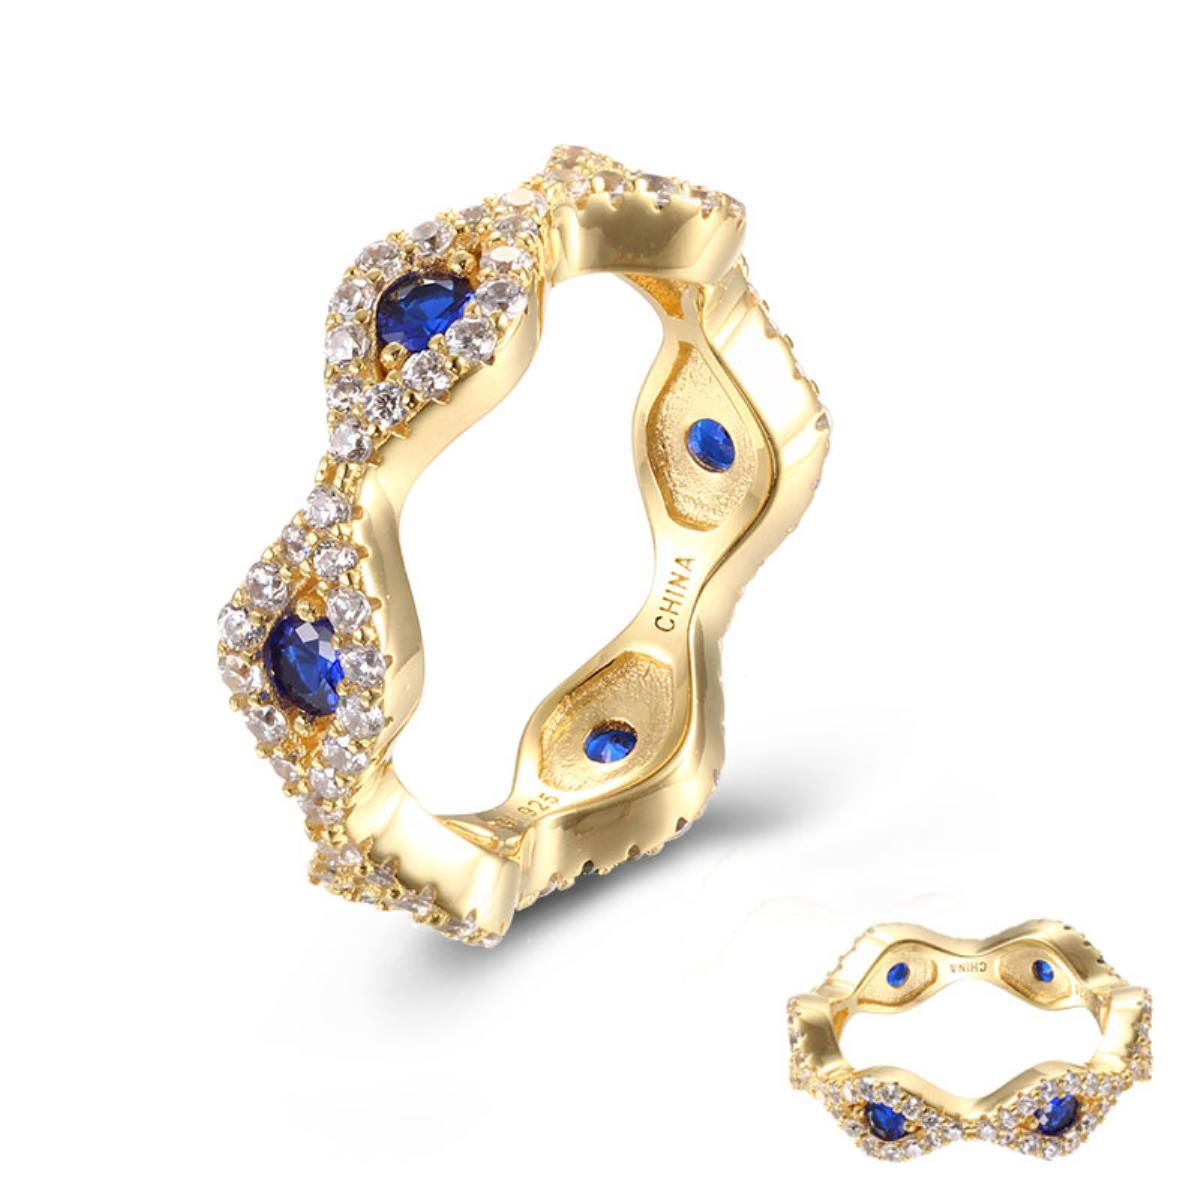 Sterling Silver+1M Yellow Gold Rnd #113 Blue Spinel & White CZ Evil Eye Clusters 6mm Eternity Band